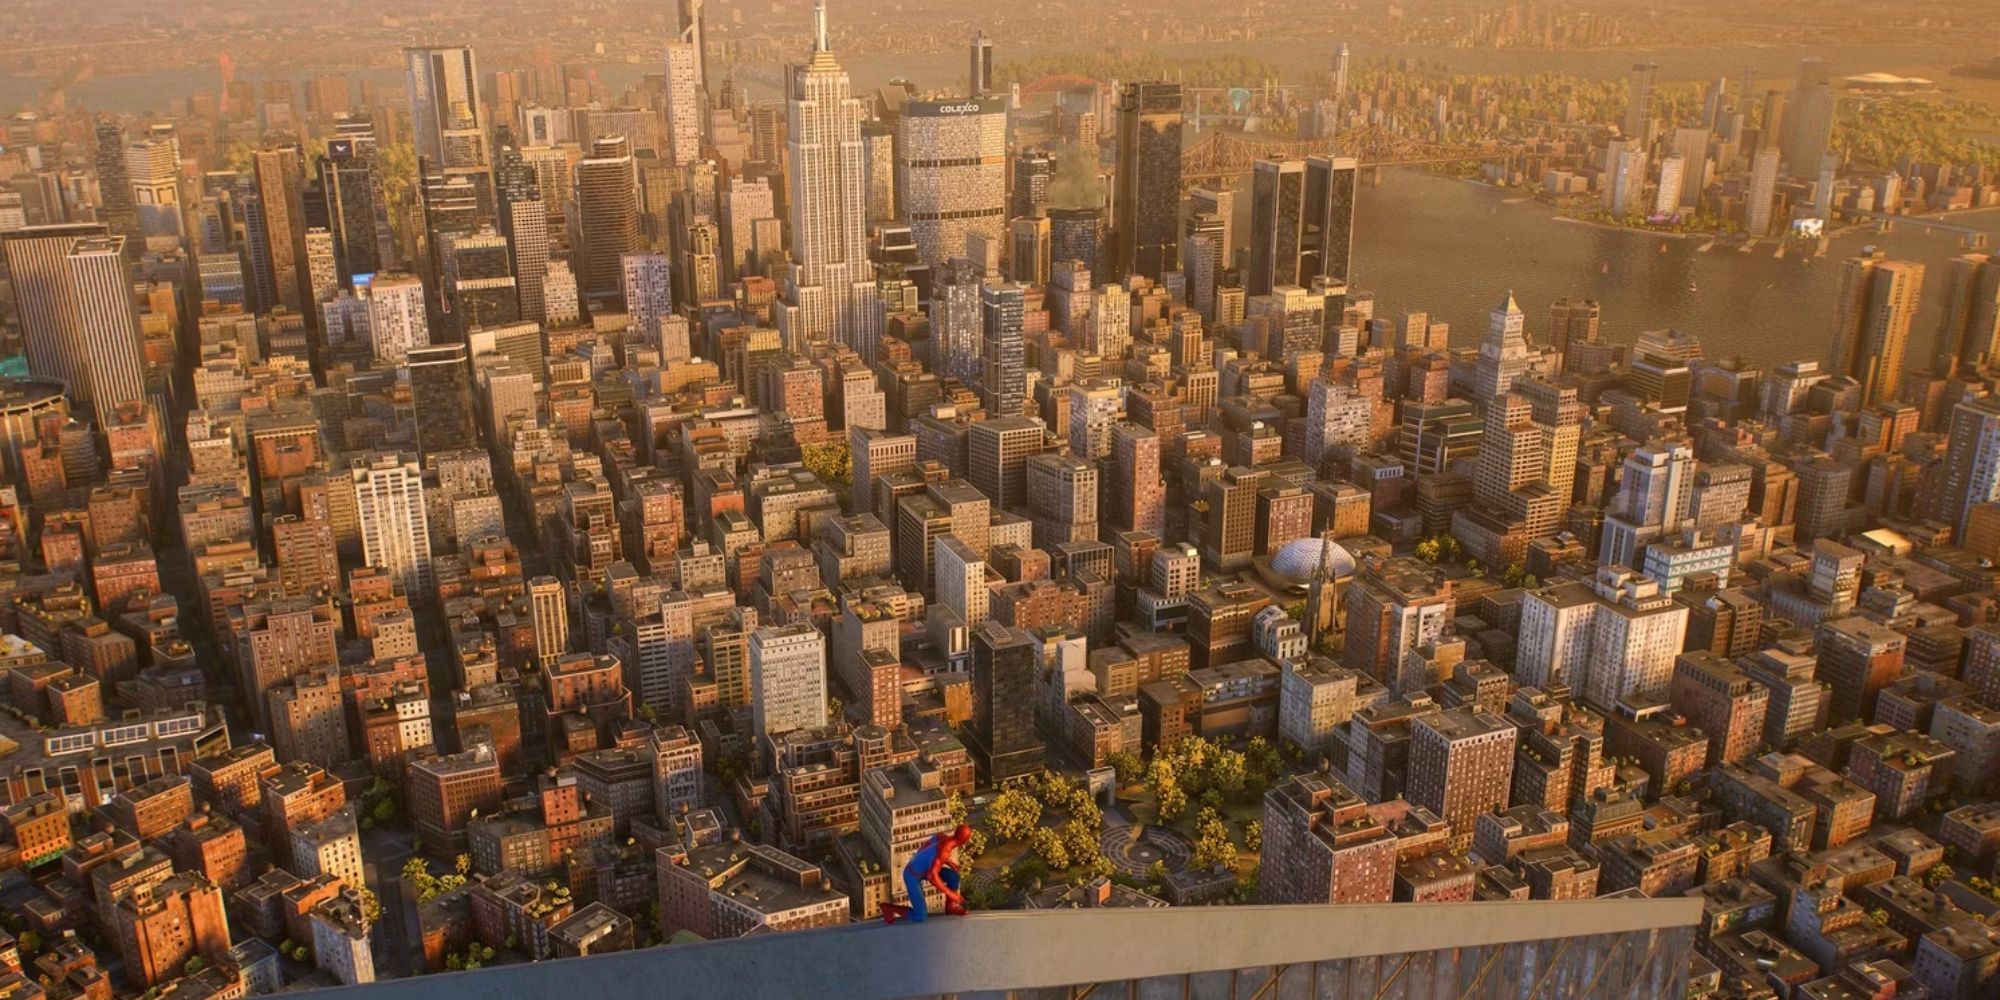 Spider-Man sat on top of a large building overlooking New York